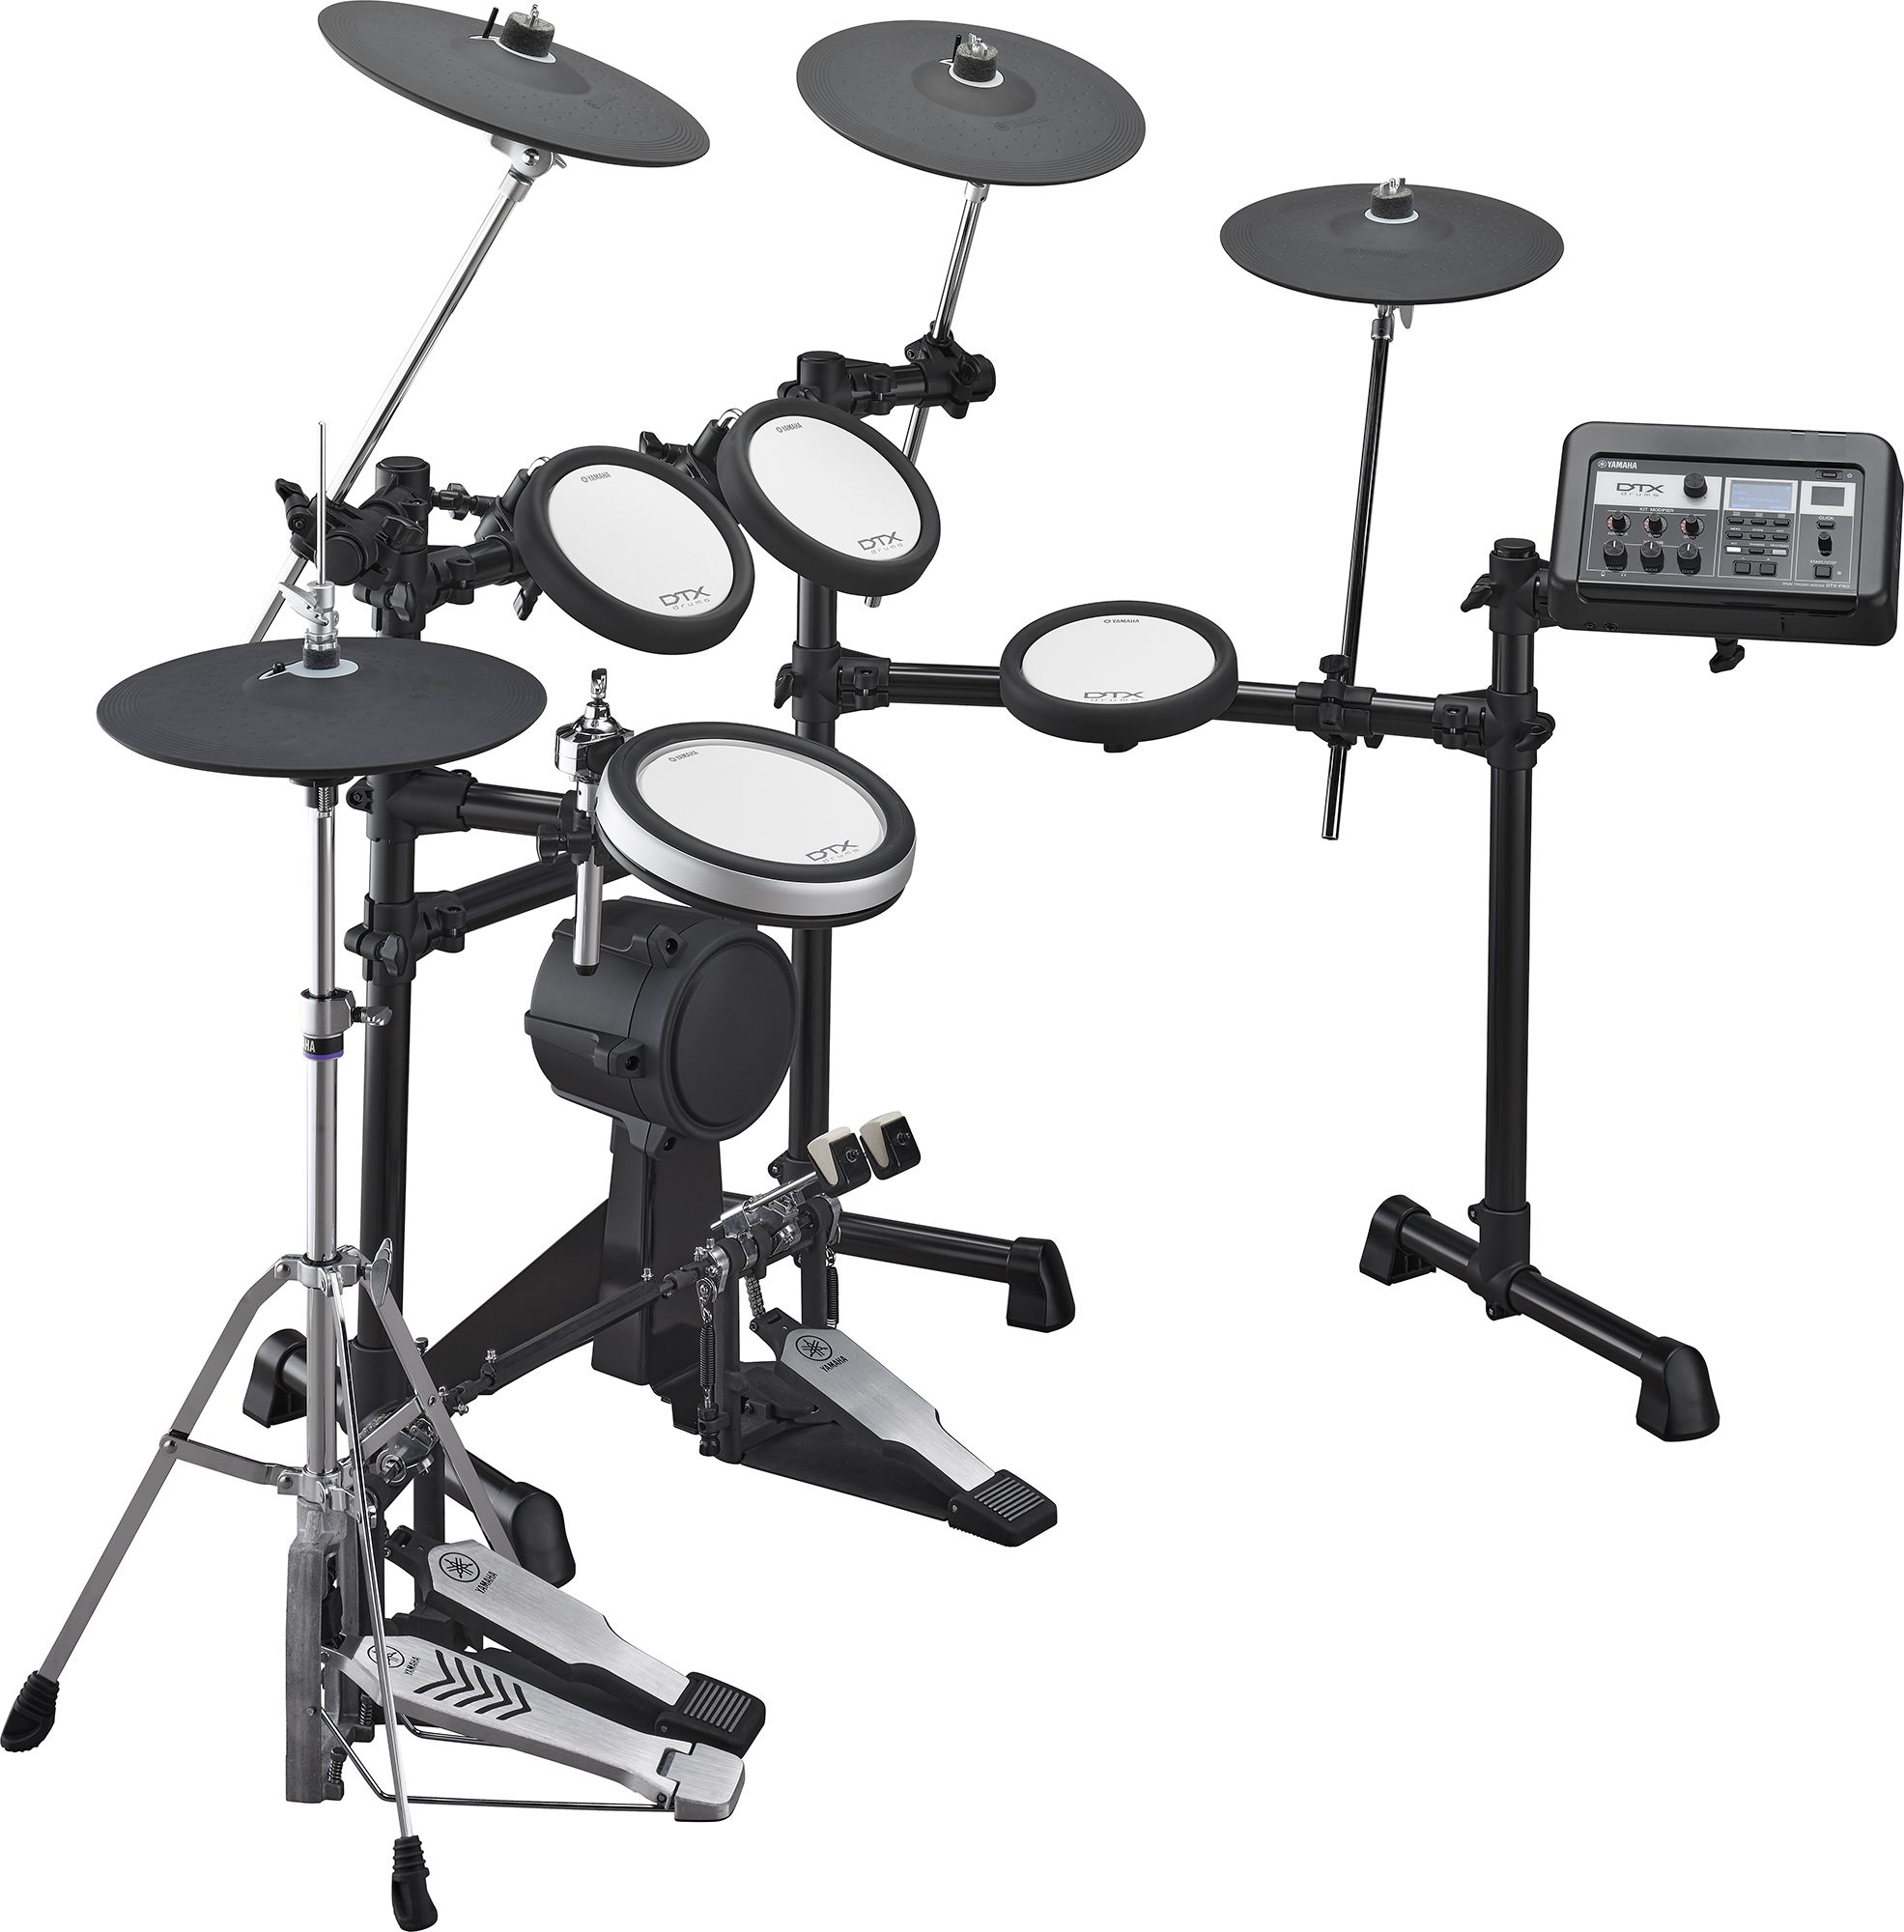 / Oceania / / Series Products / Musical Instruments Middle - Drums - Yamaha - Drum - East / CIS Asia Drums Electronic - Kits - - Electronic Products America DTX6 Latin - Africa